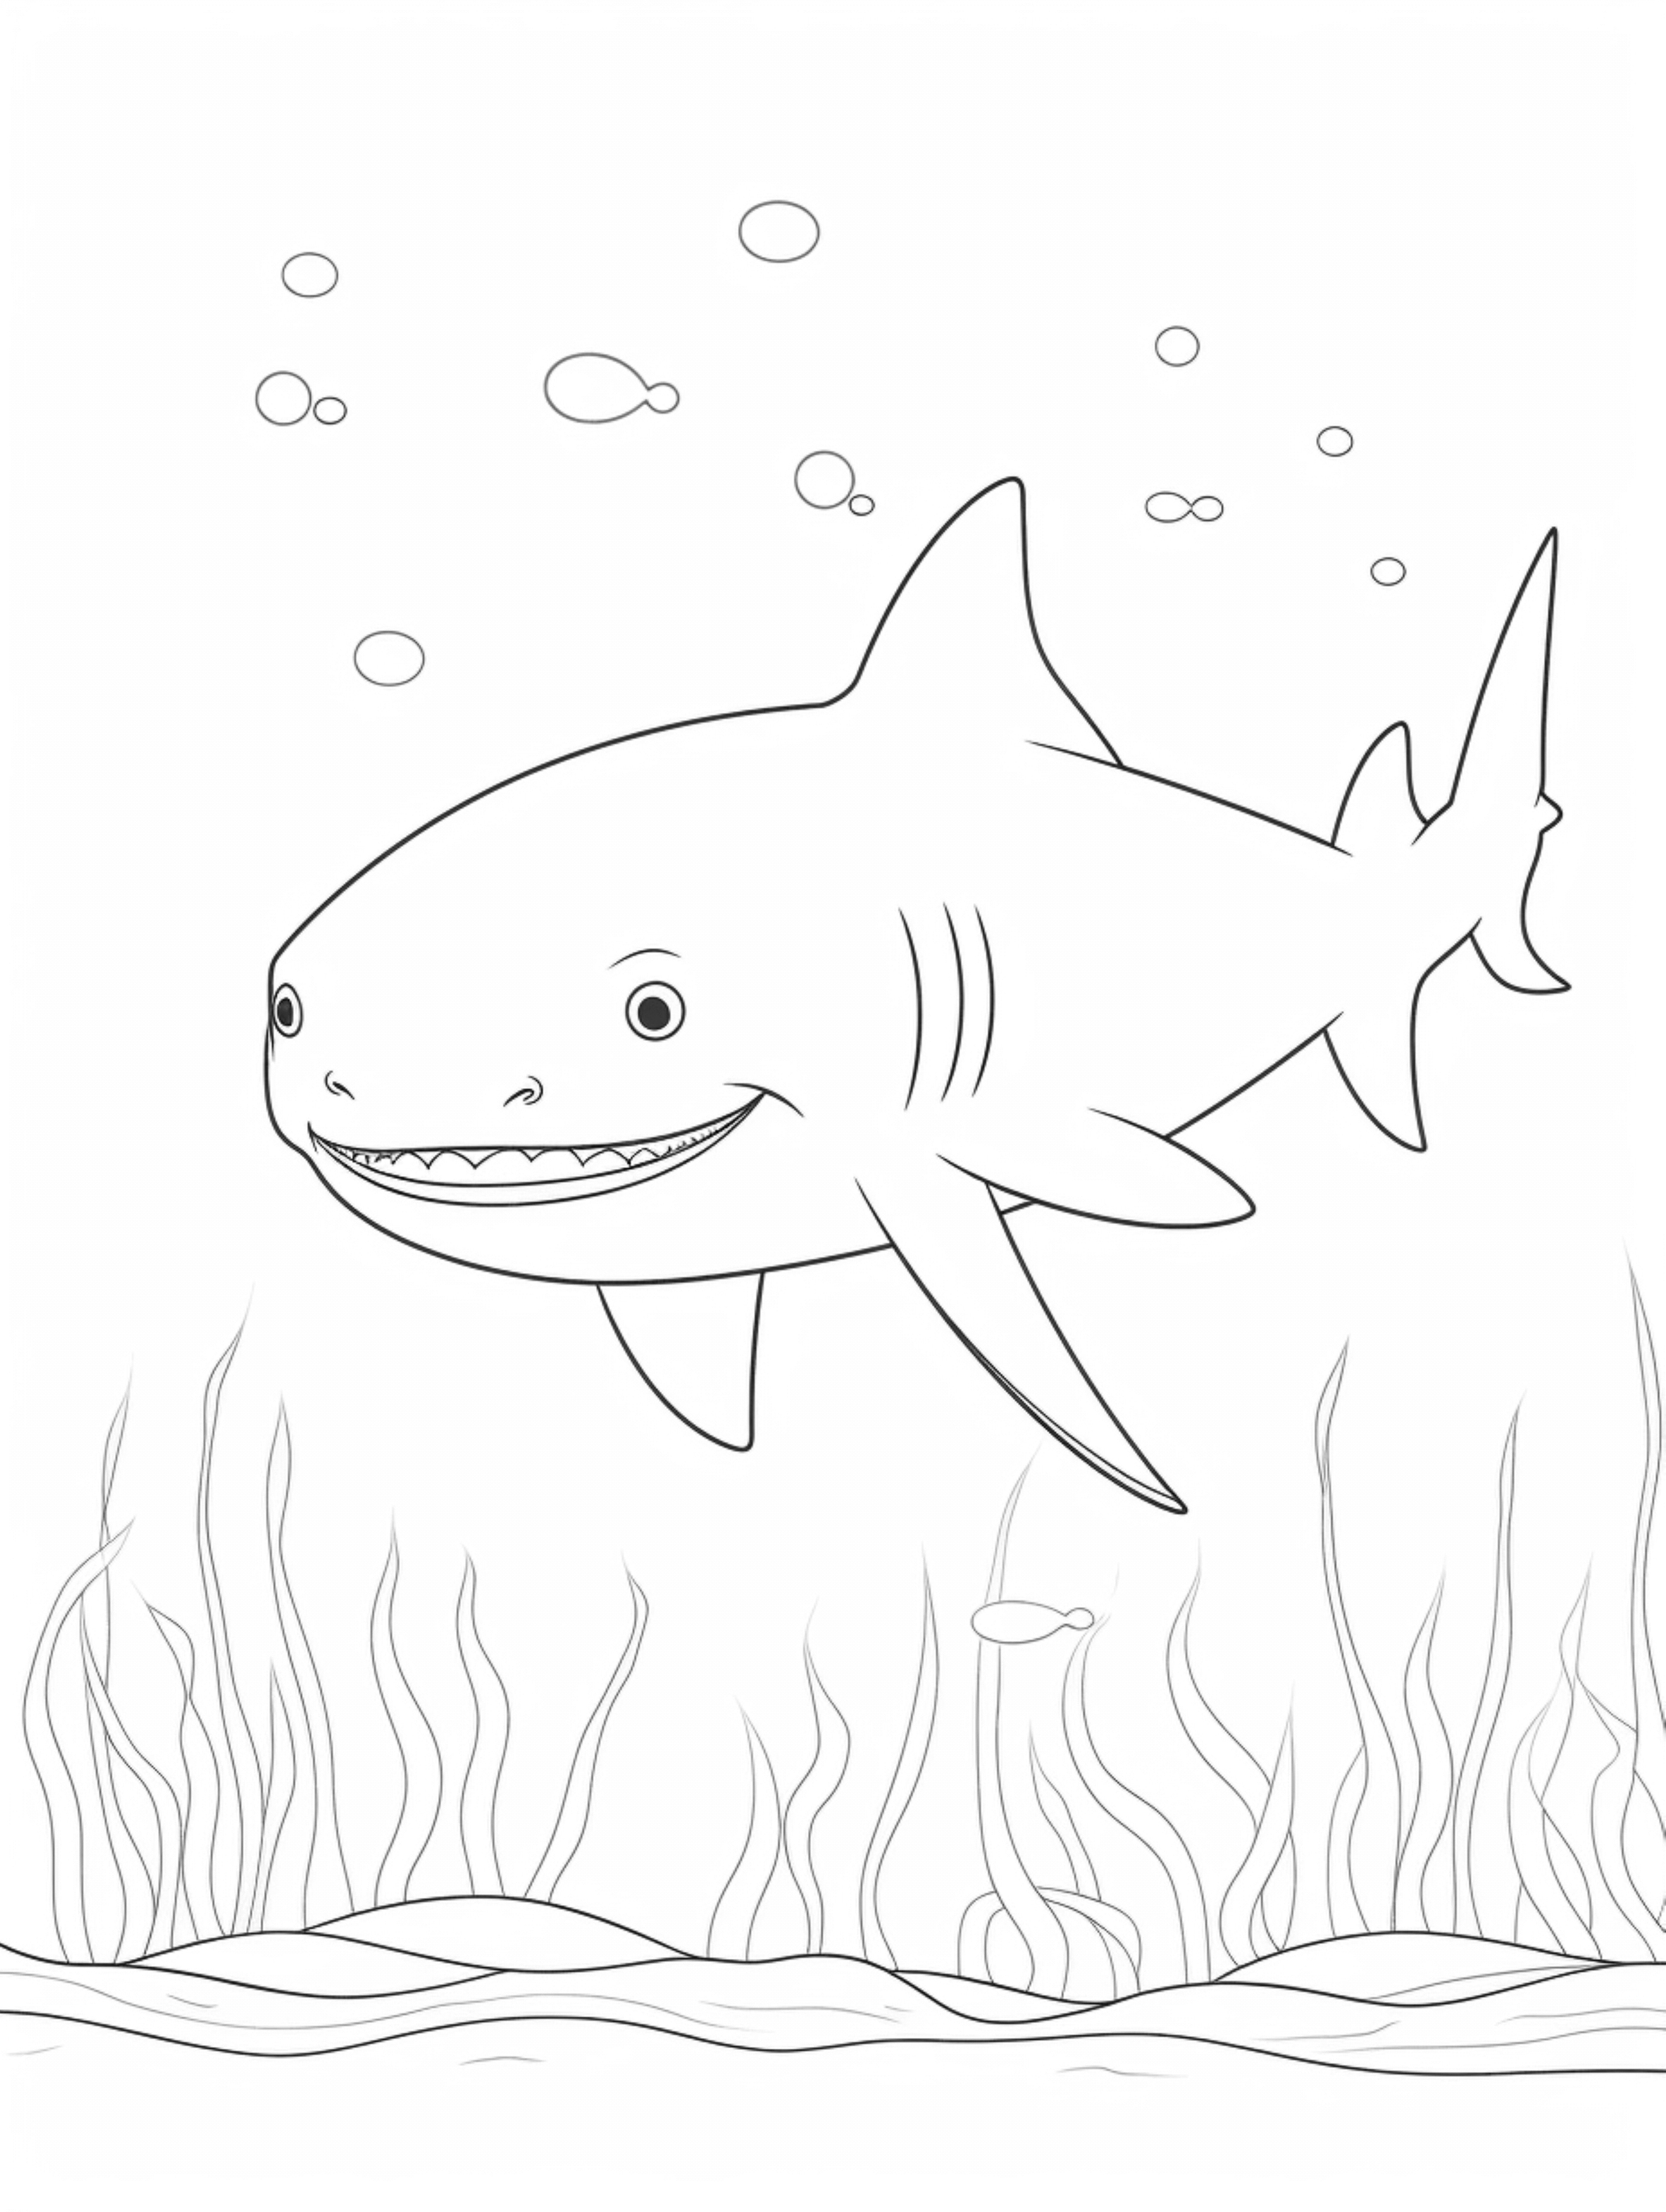 01 cute bull shark in its habitat coloring page for